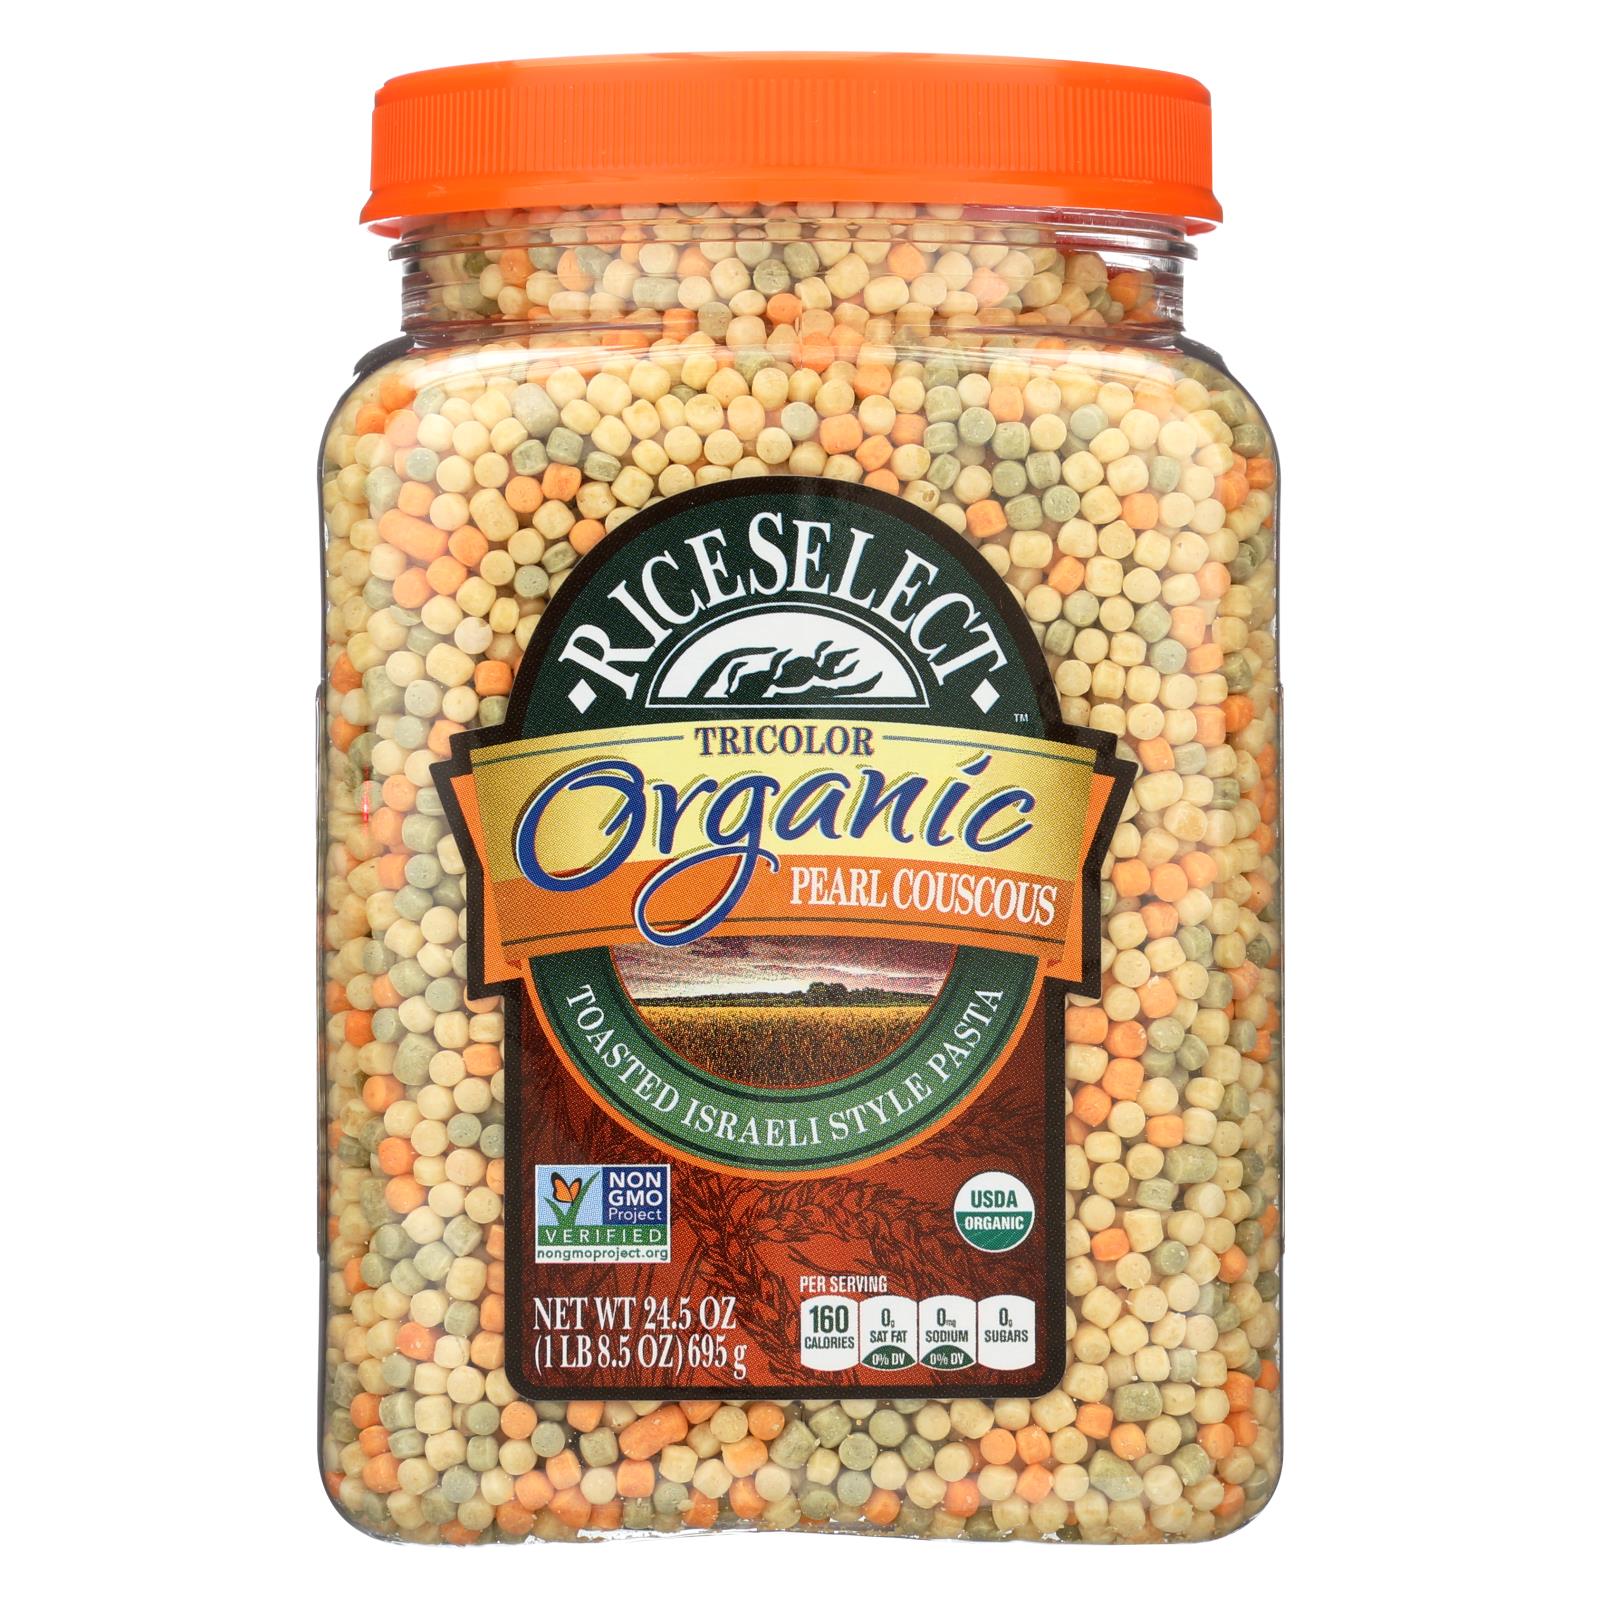 Riceselect Organic Pearl Couscous, Tri-Color - 4개 묶음상품 - 24.5 OZ